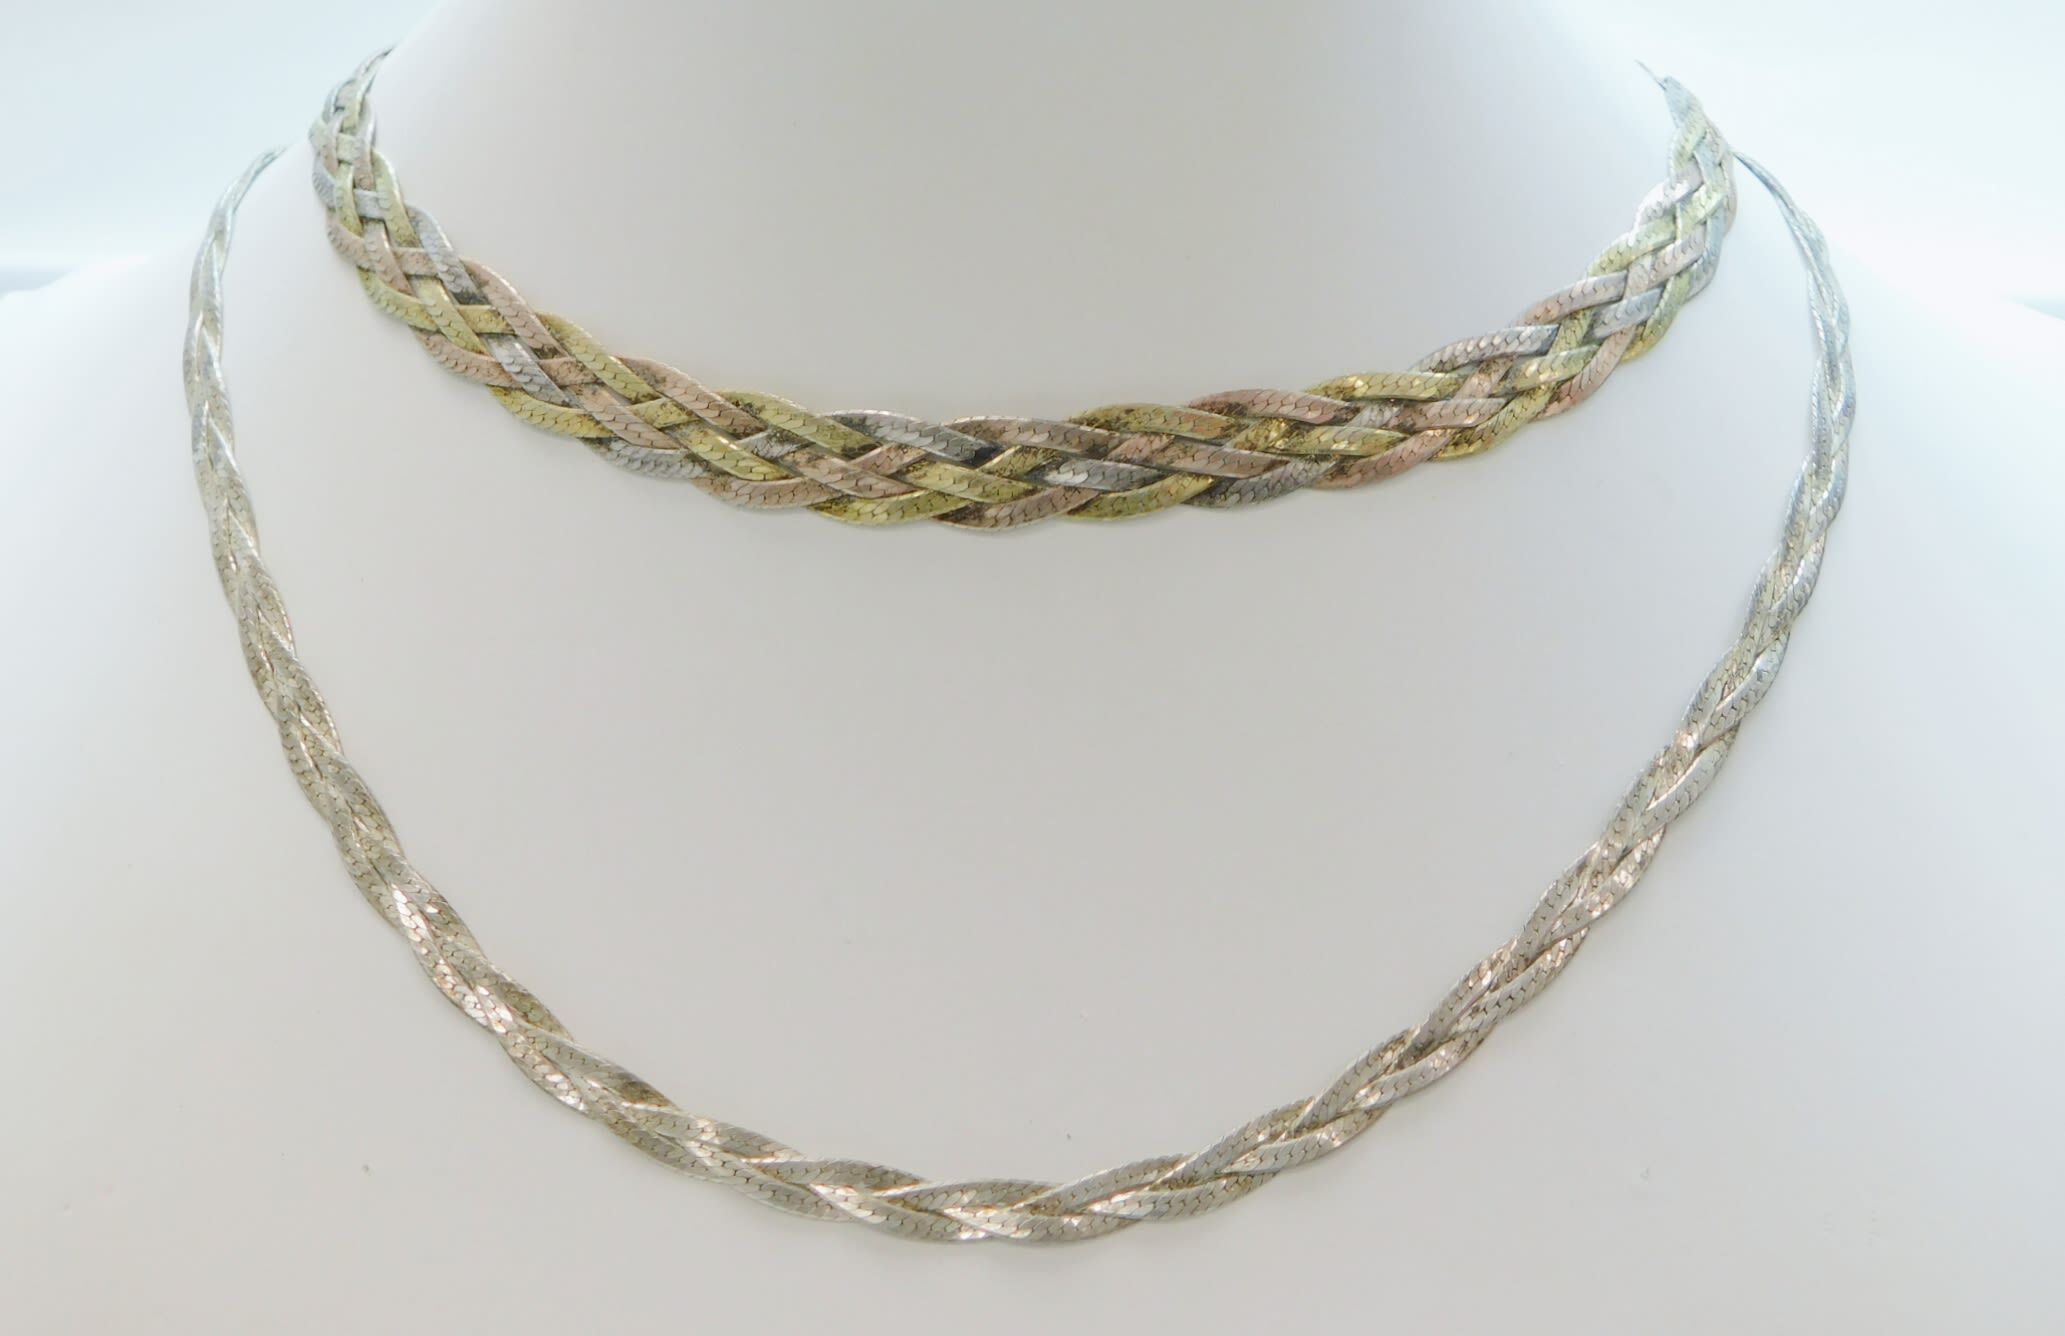 Mixed Metal Braided Woven Herringbone Chain Necklace Vintage Classic